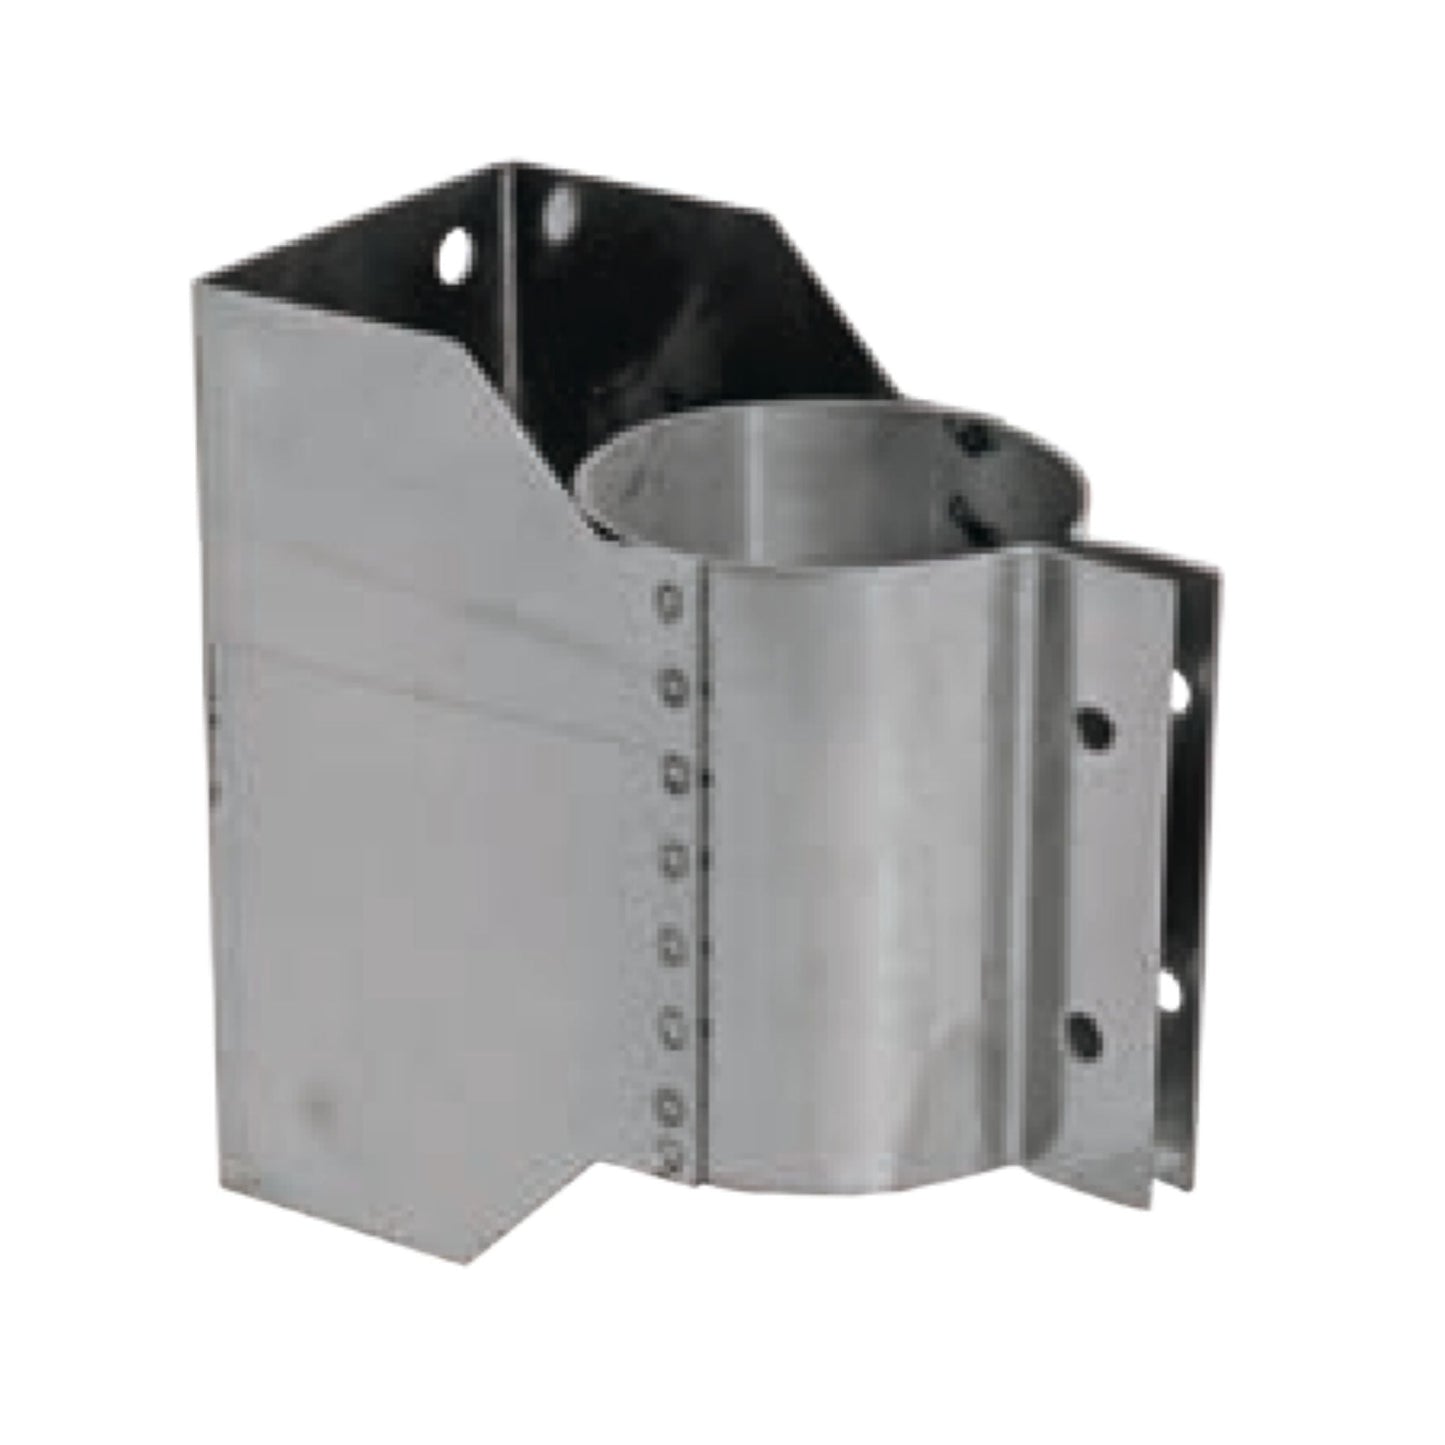 DuraVent FasNSeal 4" 29-4C Stainless Steel Wall Bracket